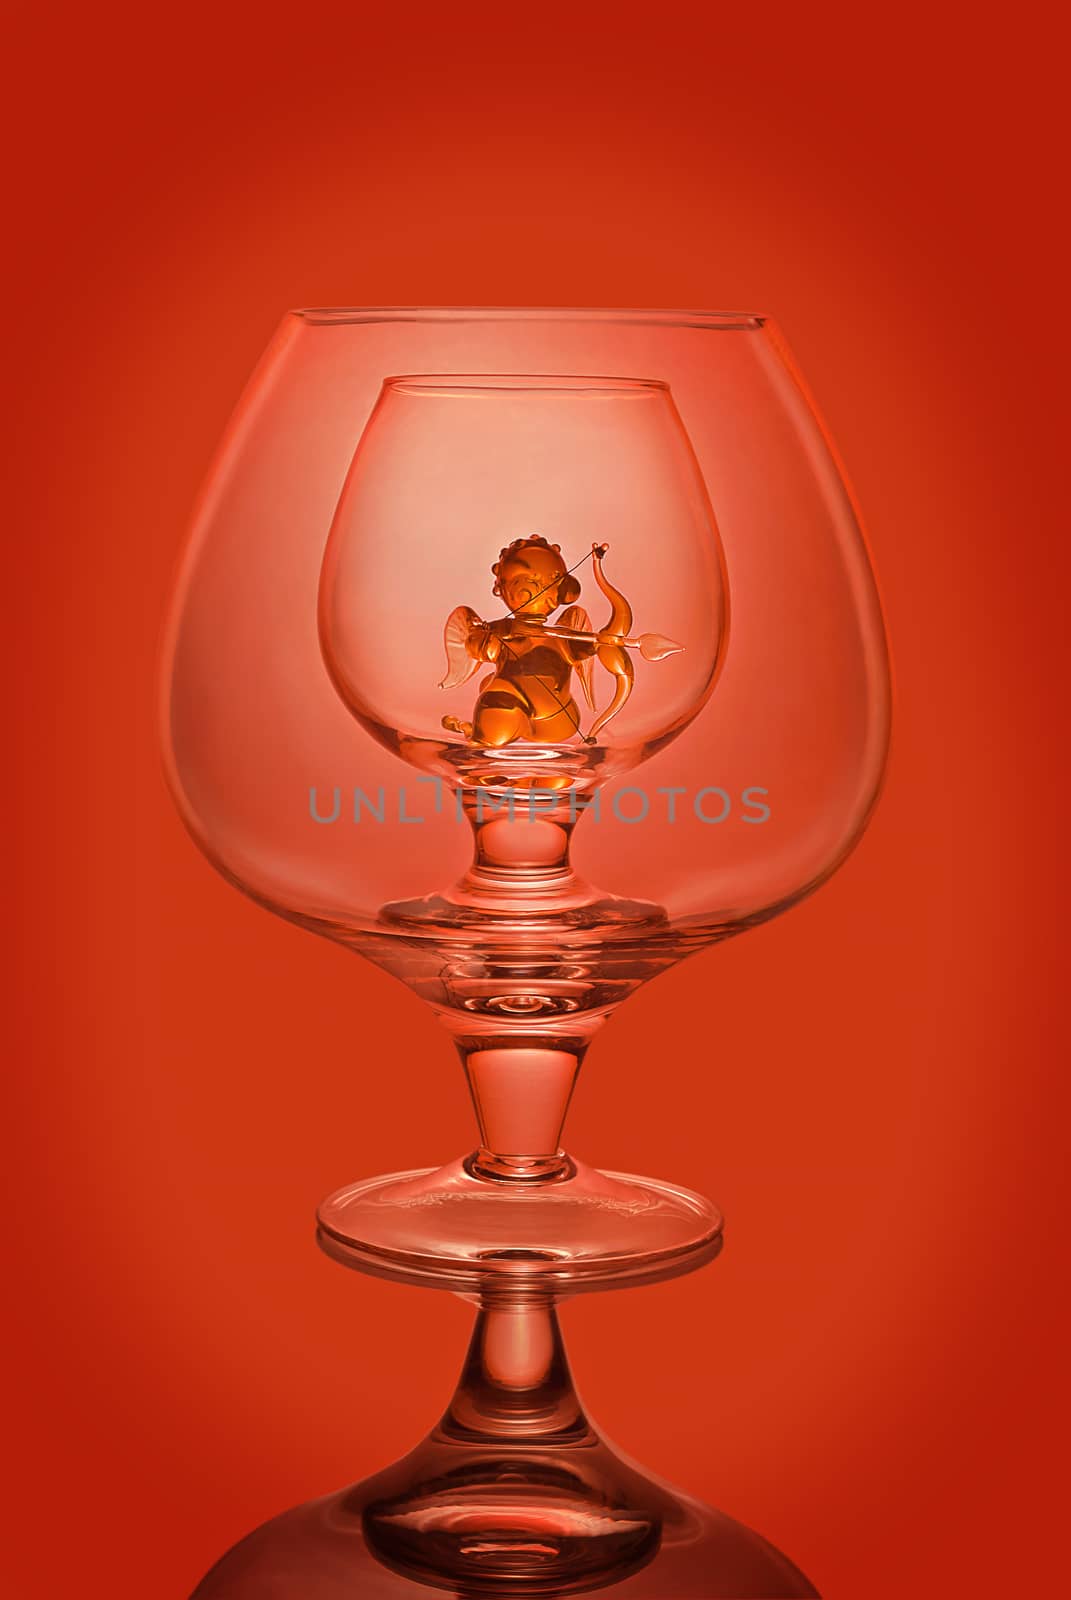 Empty wine glasses on a red background by Gaina